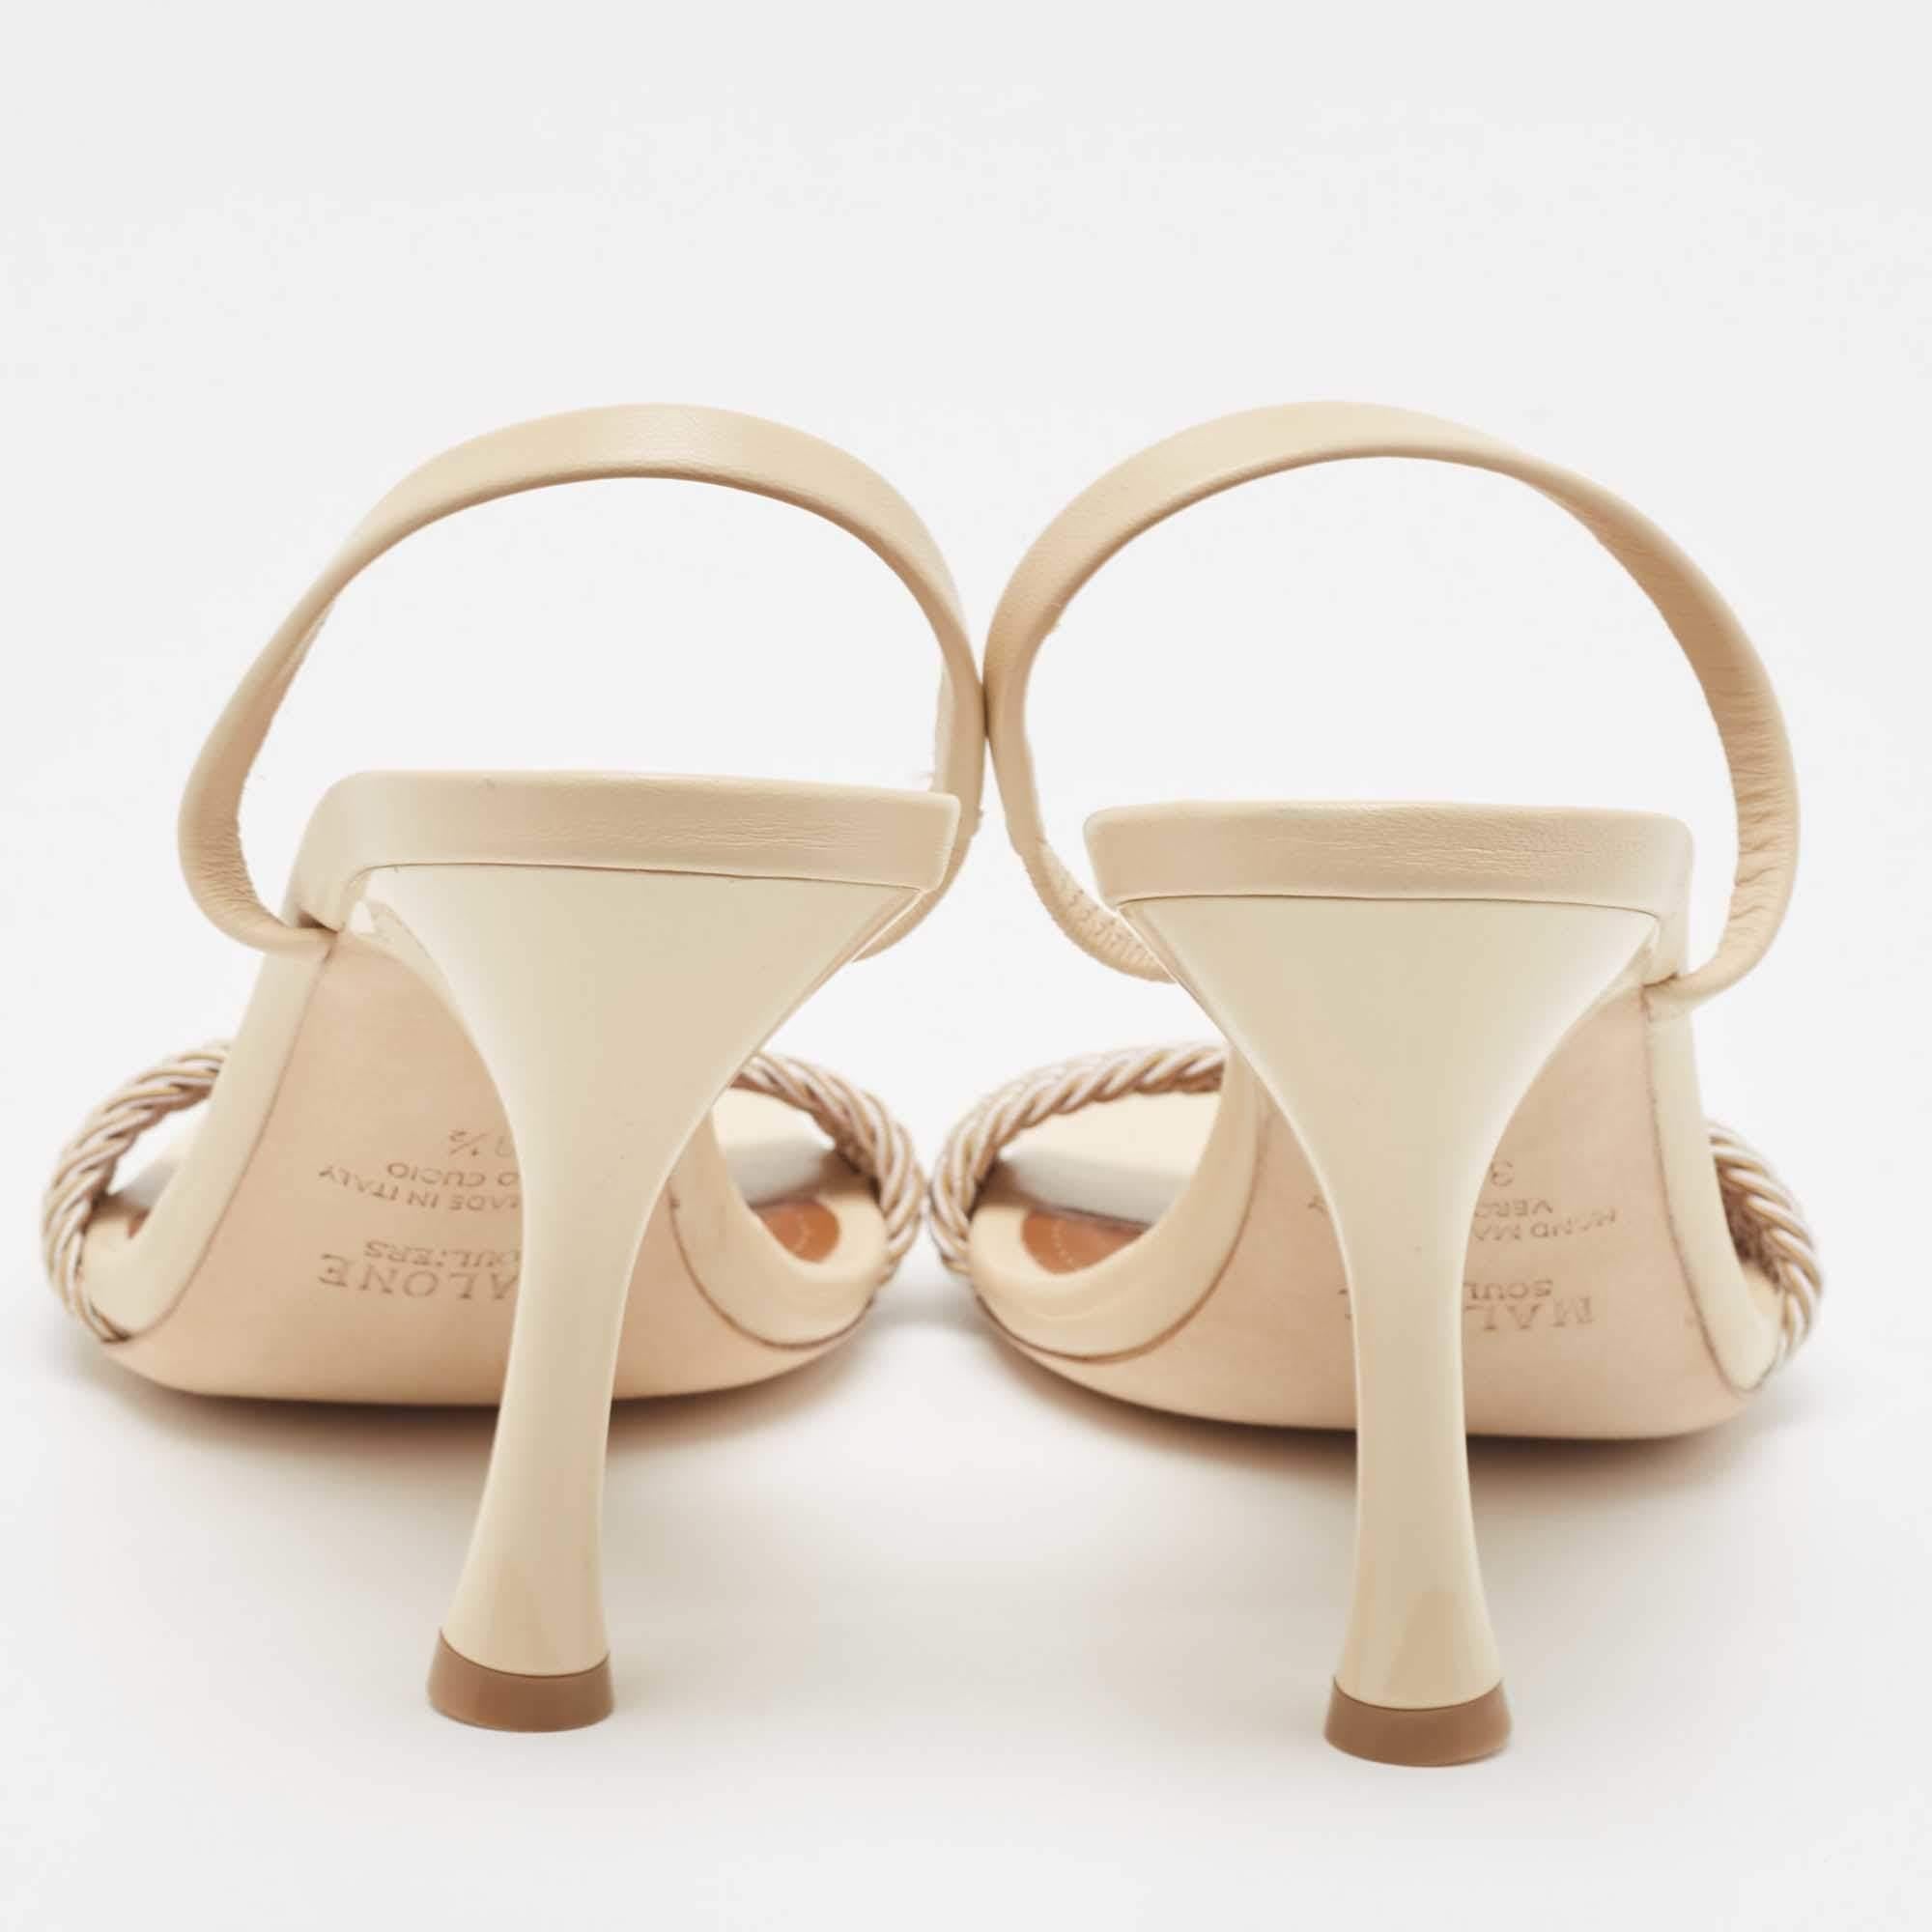 Malone Souliers Cream Leather Frida 70 Slingback Sandals Size 39.5 1